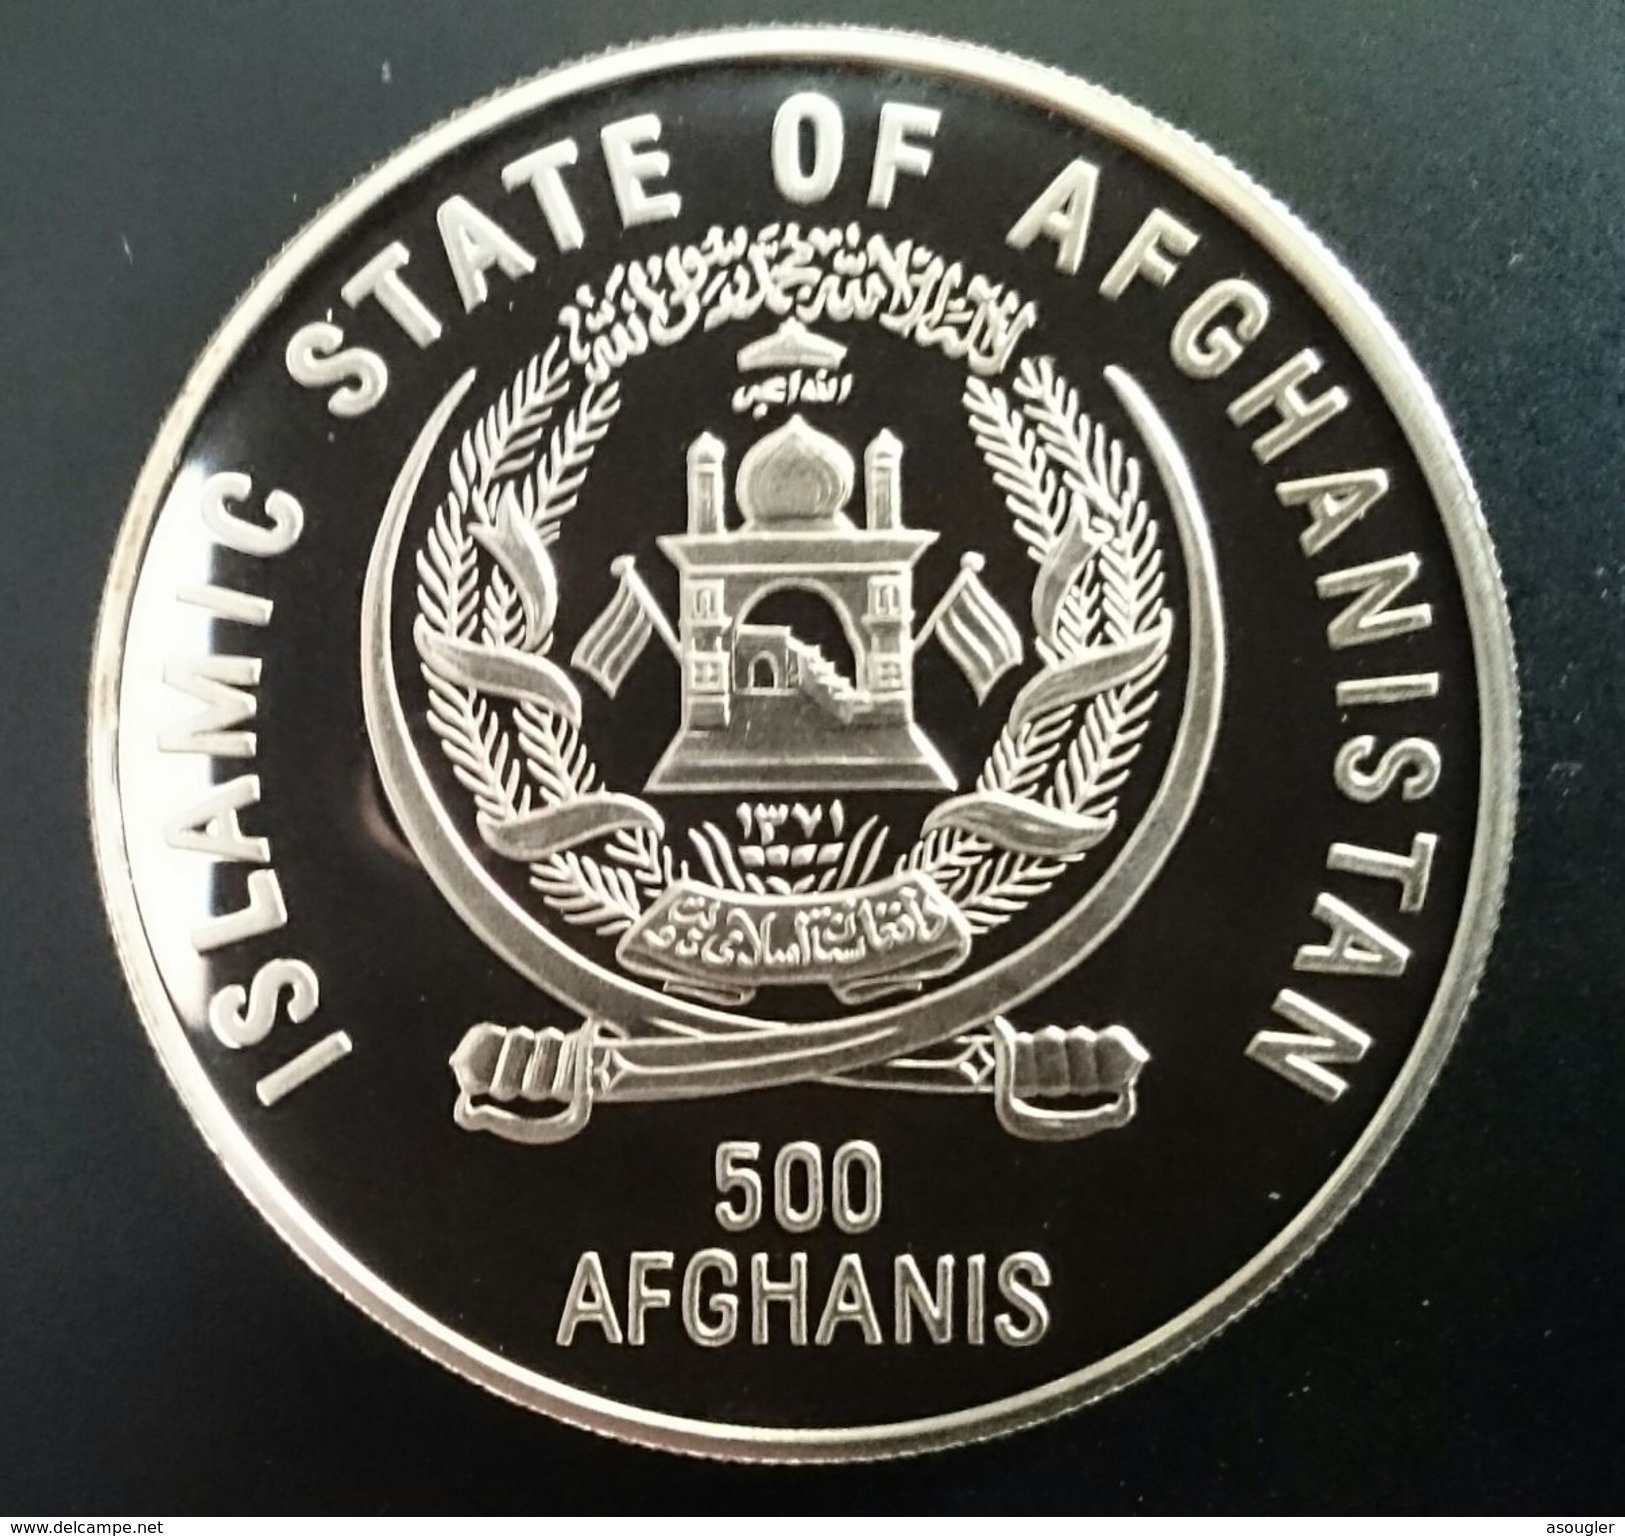 AFGHANISTAN 500 AFGHANIS 1995 SILVER PROOF "50th Anniversary United Nations" Free Shipping Via Registered Air Mail - Afghanistan